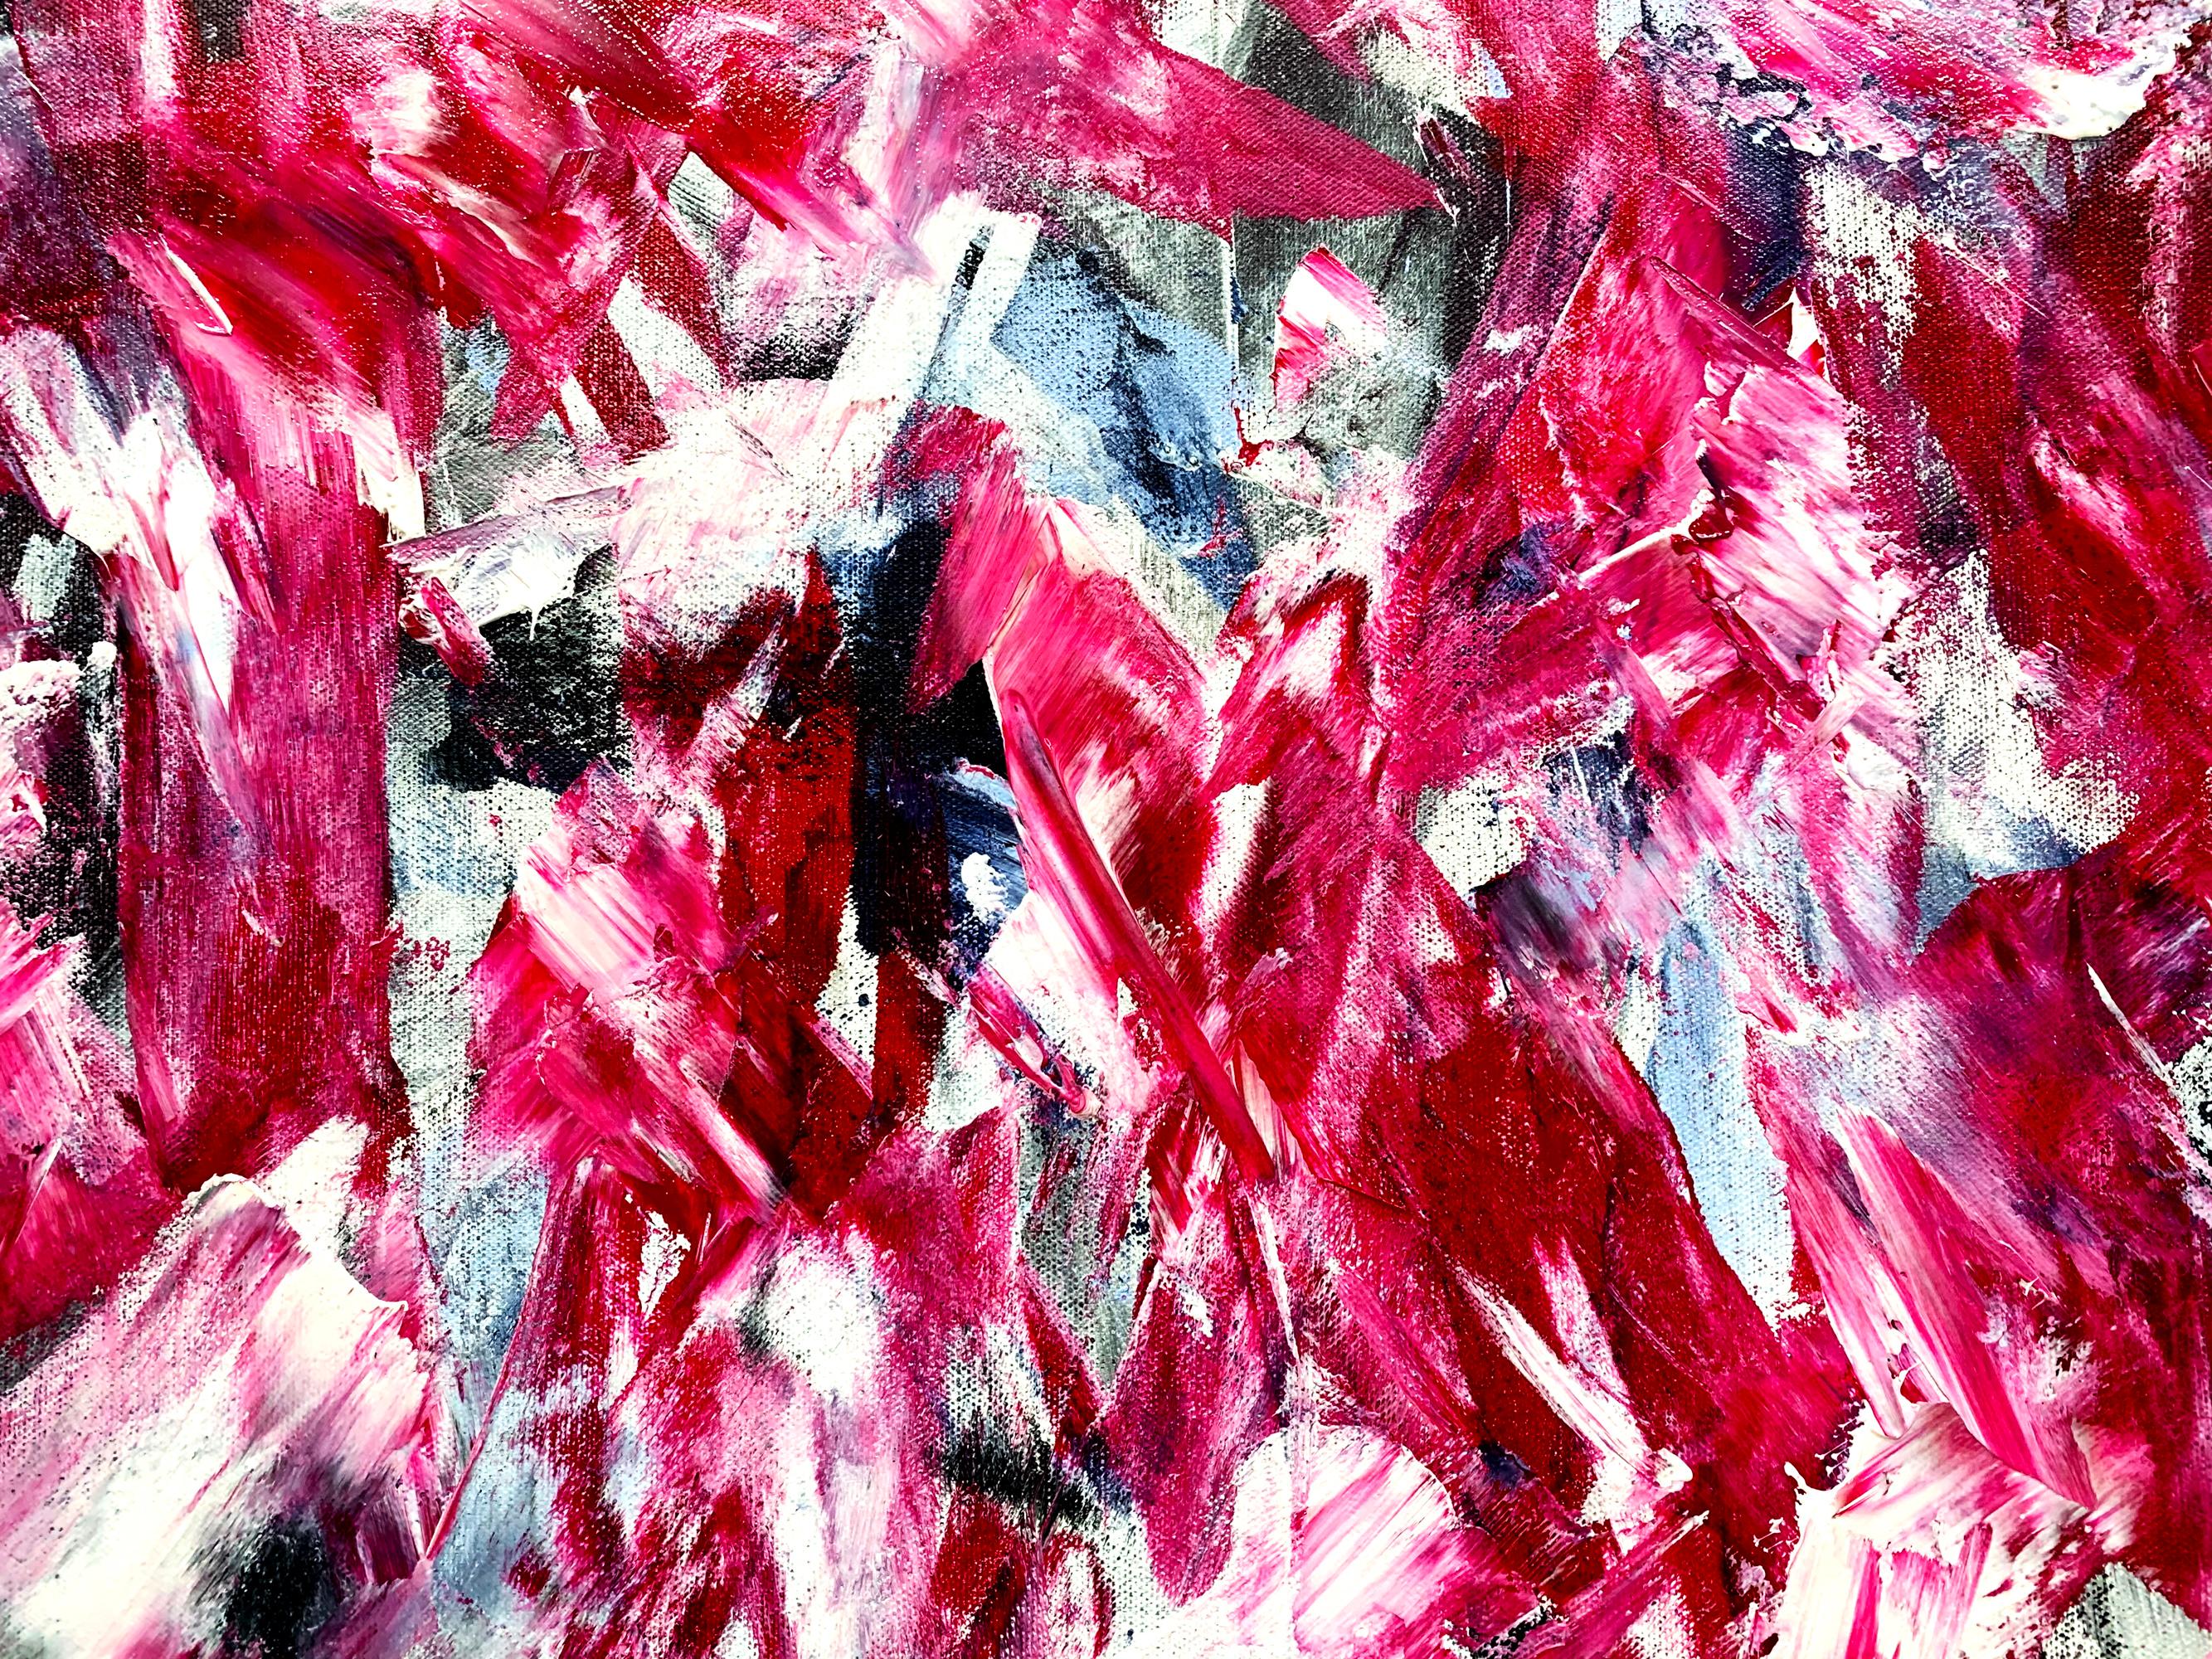 Red Concealment - Abstract Expressionist Painting by Estelle Asmodelle